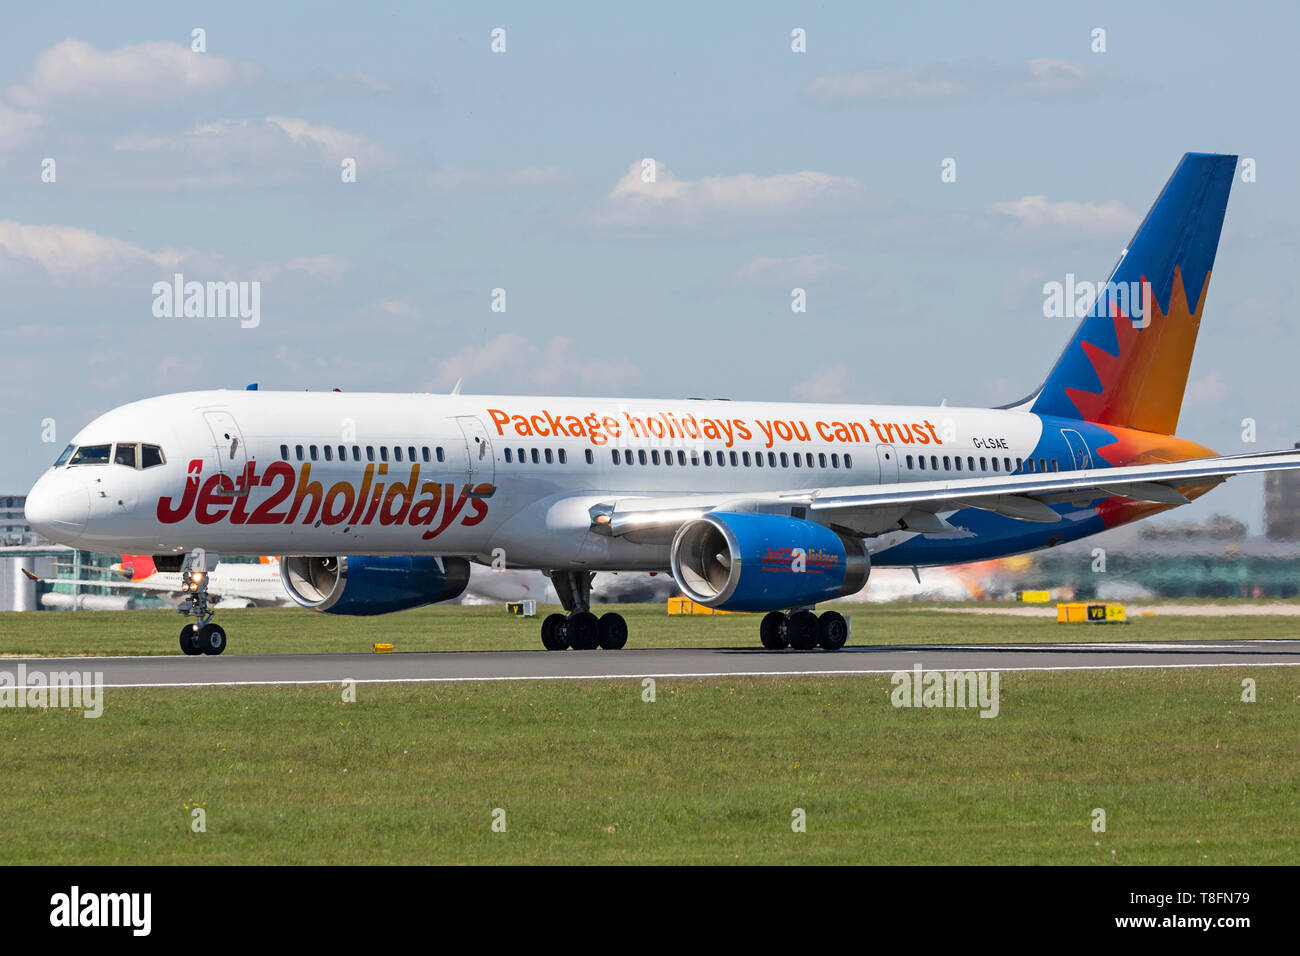 Jet2 Holidays Boeing 757-200, registration G-LSAE, taking off from Manchester Airport, England. Stock Photo